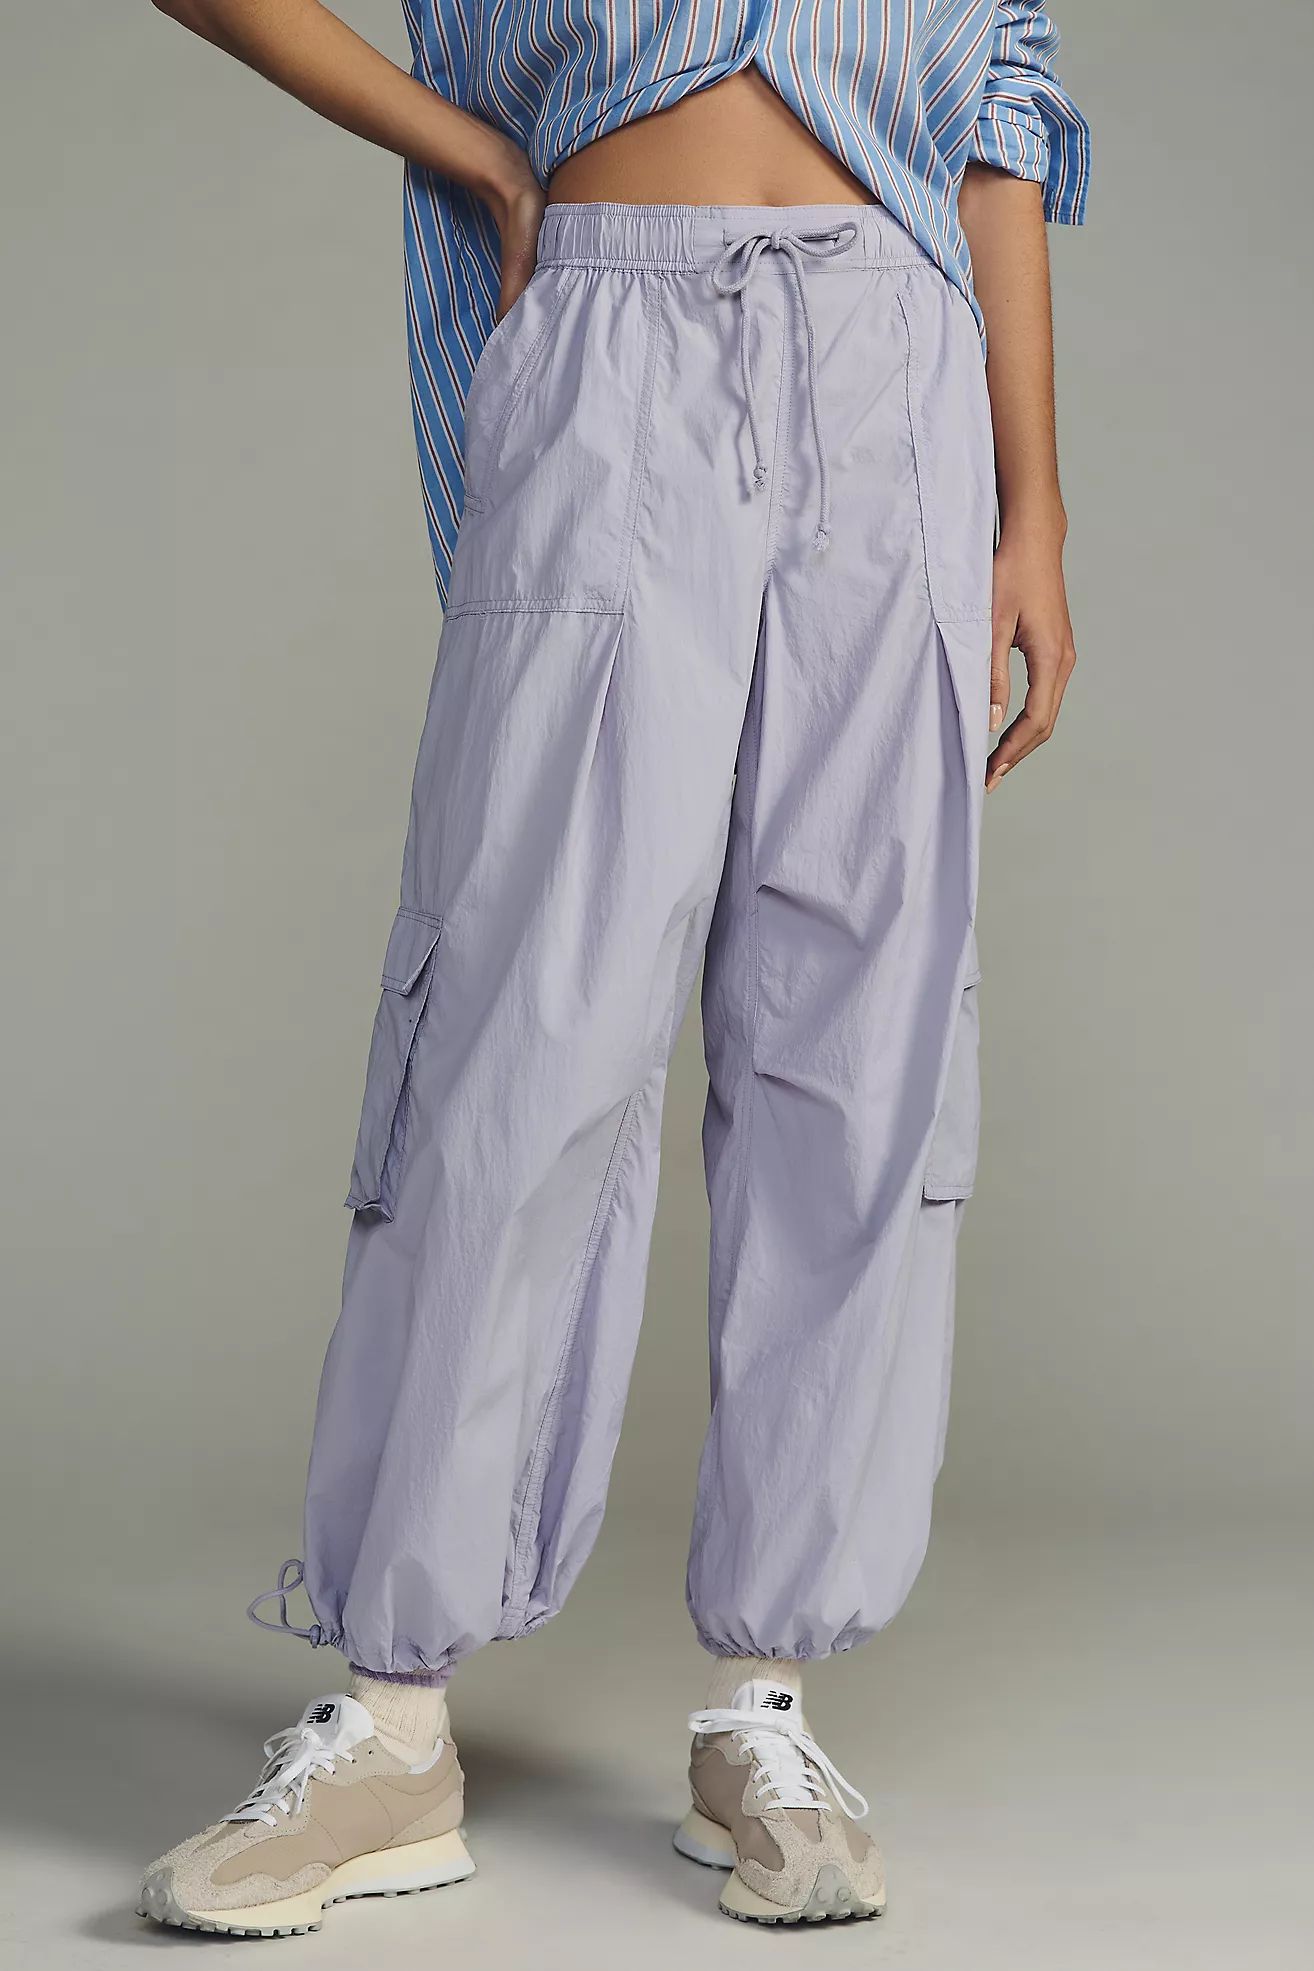 Daily Practice by Anthropologie Base Jump Parachute Pants | Anthropologie (US)